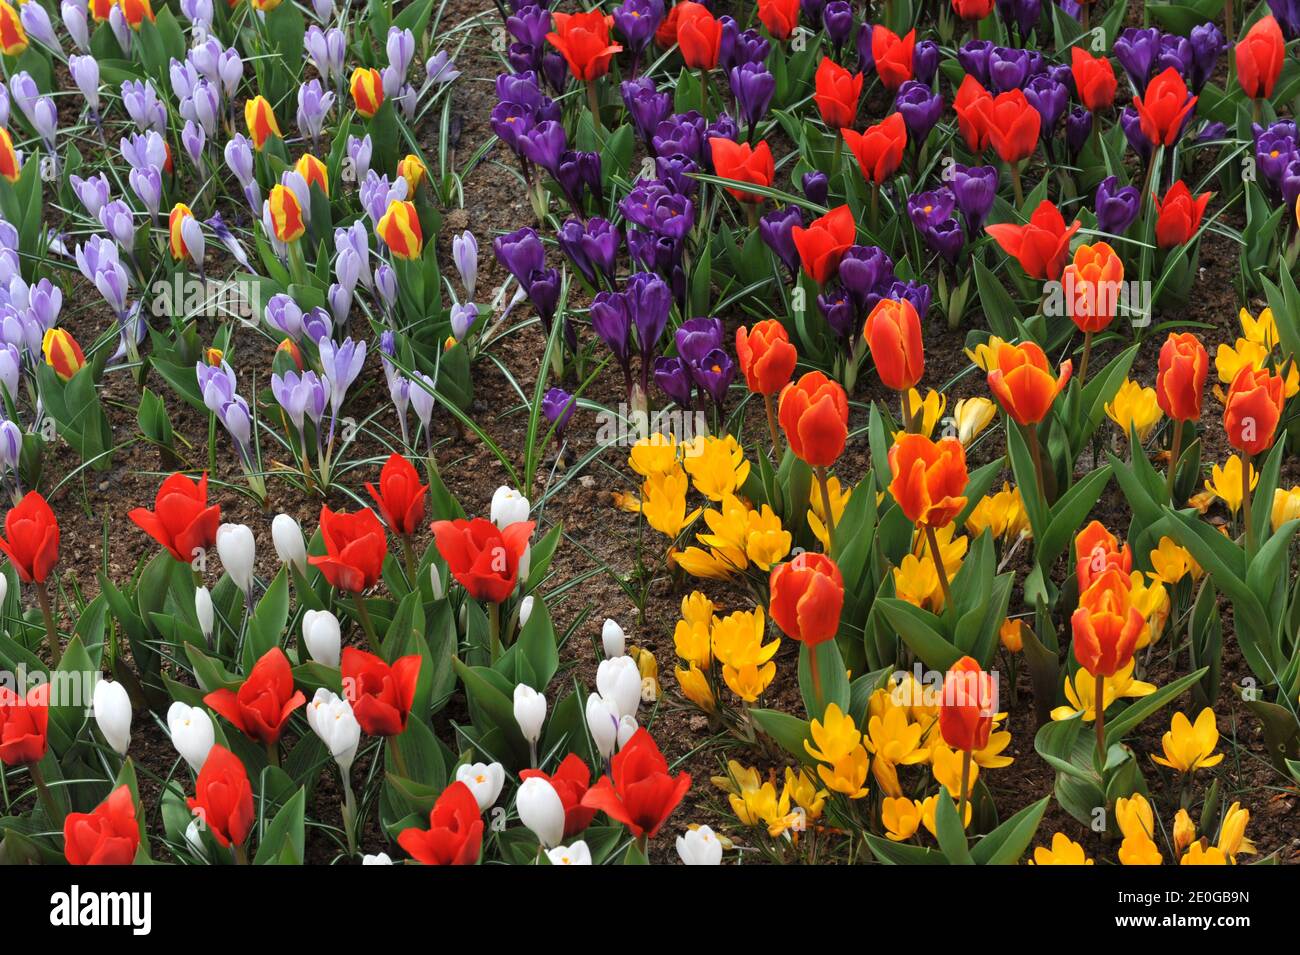 Bright tulips (Tulipa) and crocuses bloom in a garden in March Stock Photo